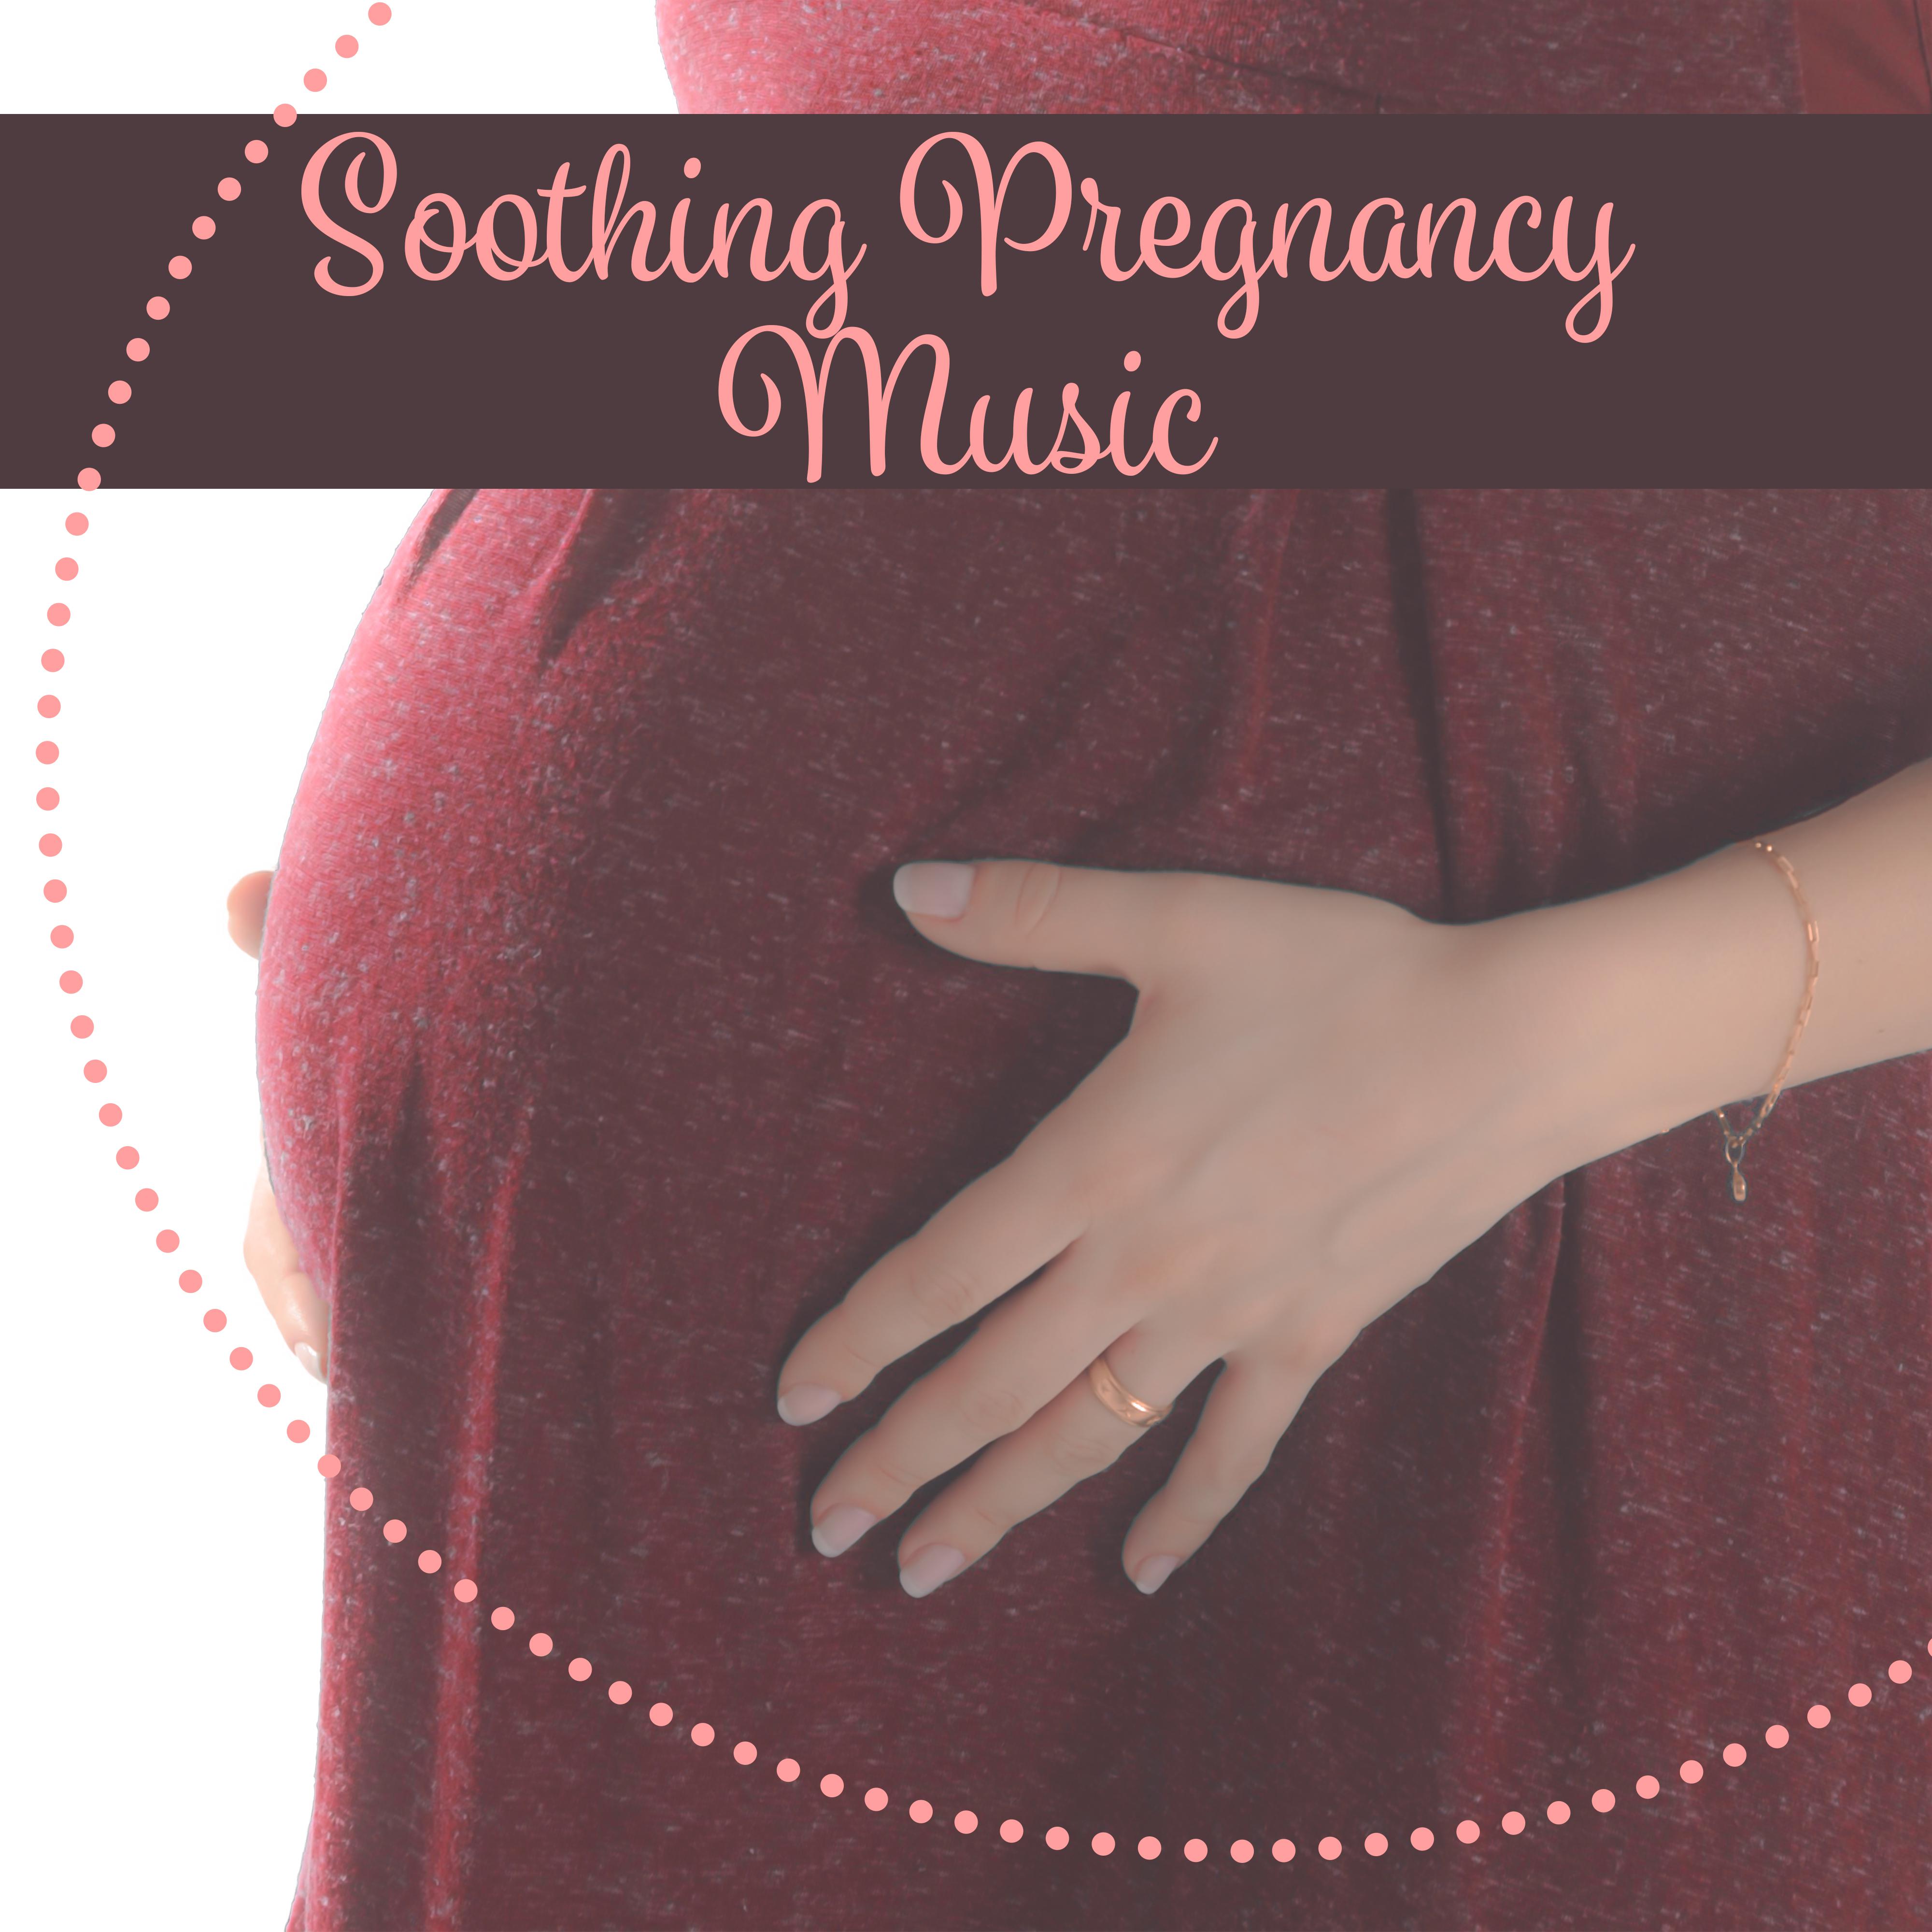 Soothing Pregnancy Music – Calm Music for Mothers, Pregnancy Relaxation, Music for Pregnant Women